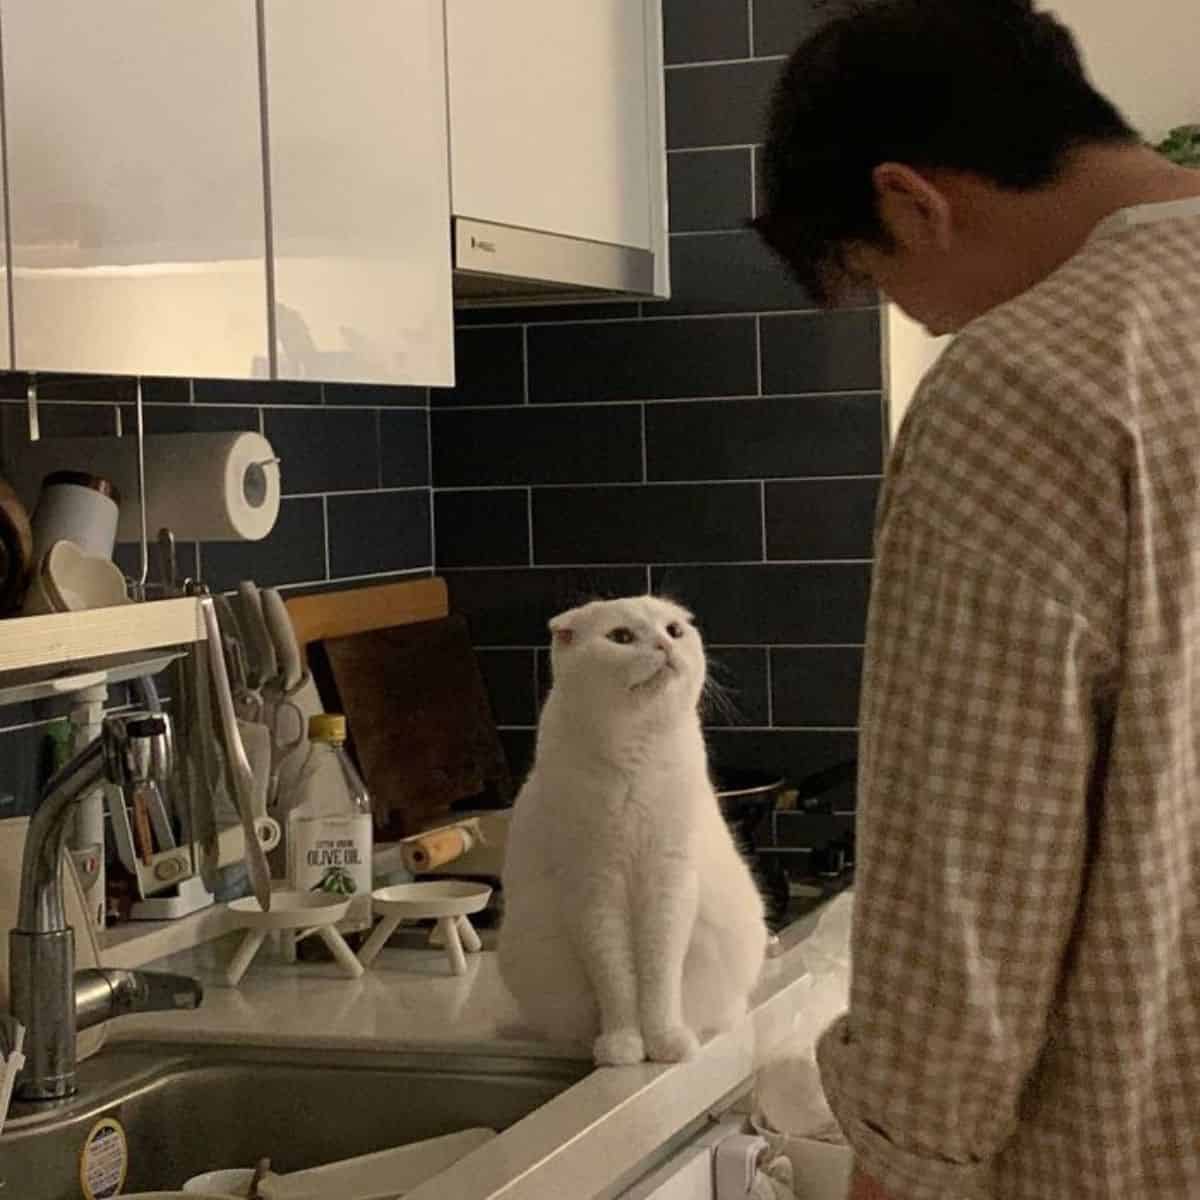 the cat sits confusedly on the sink and looks at the man